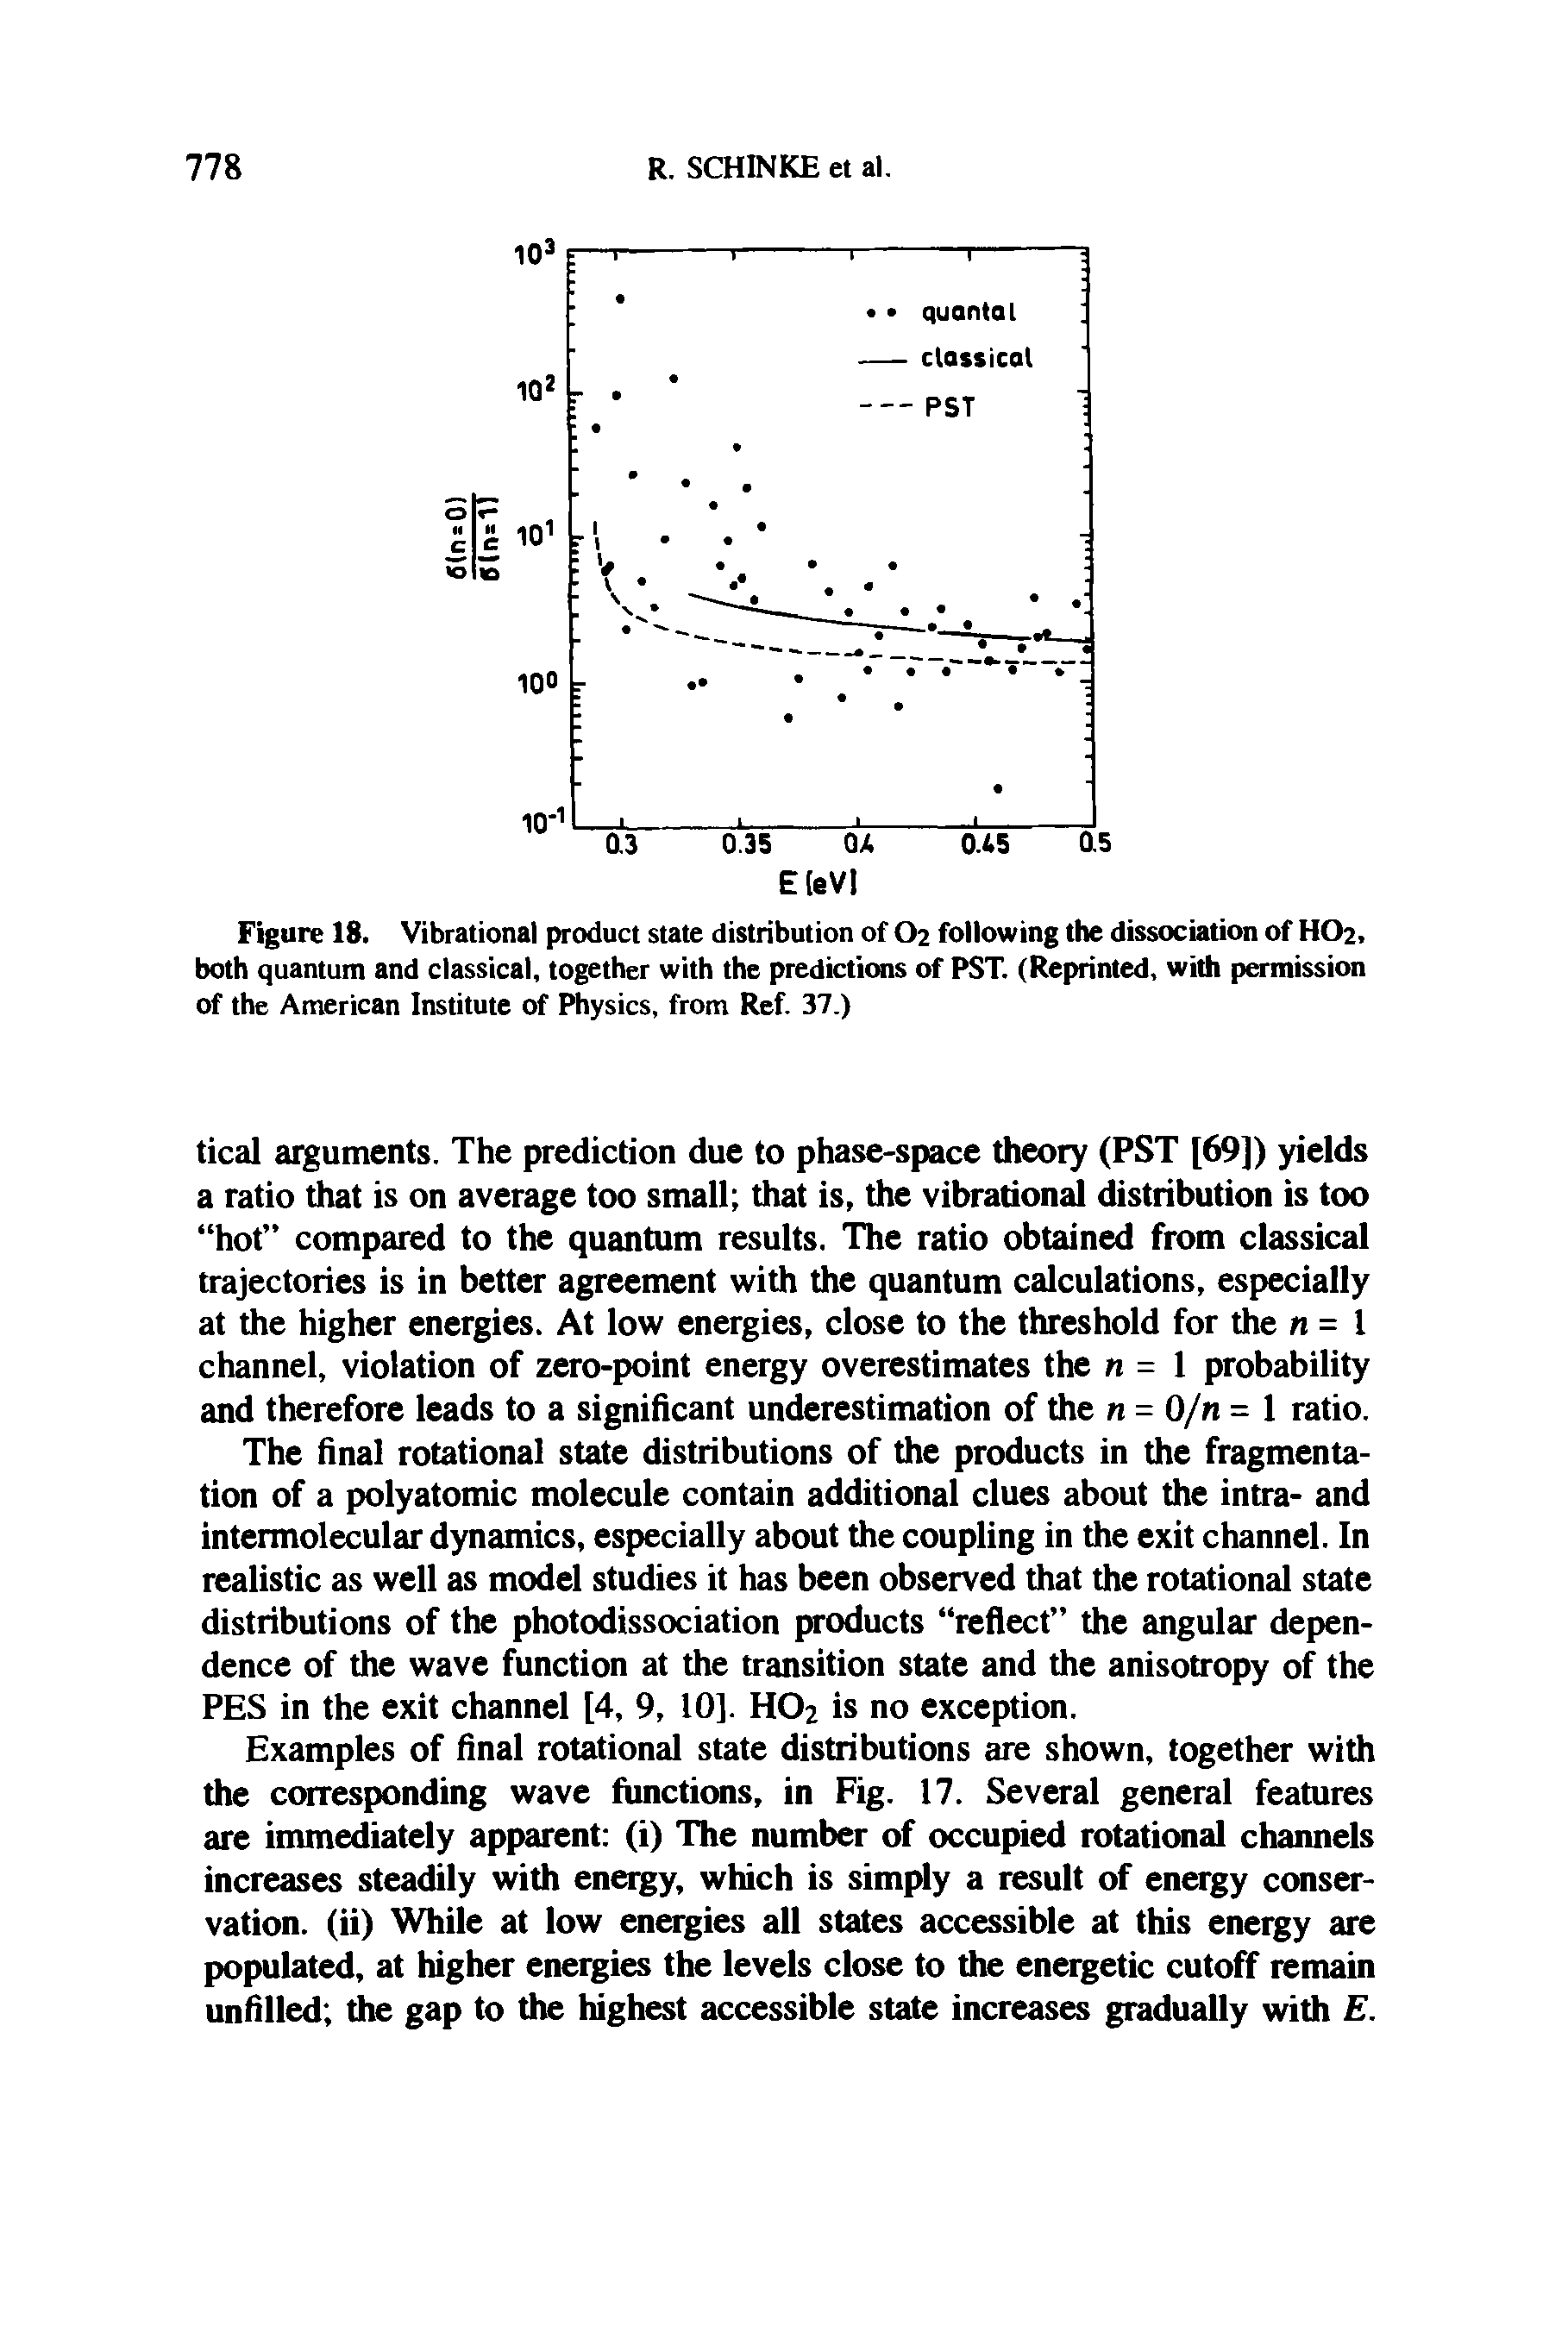 Figure 18. Vibrational product state distribution of O2 following the dissociation of HO2, both quantum and classical, together with the predictions of PST. (Reprinted, with permission of the American Institute of Physics, from Ref. 37.)...